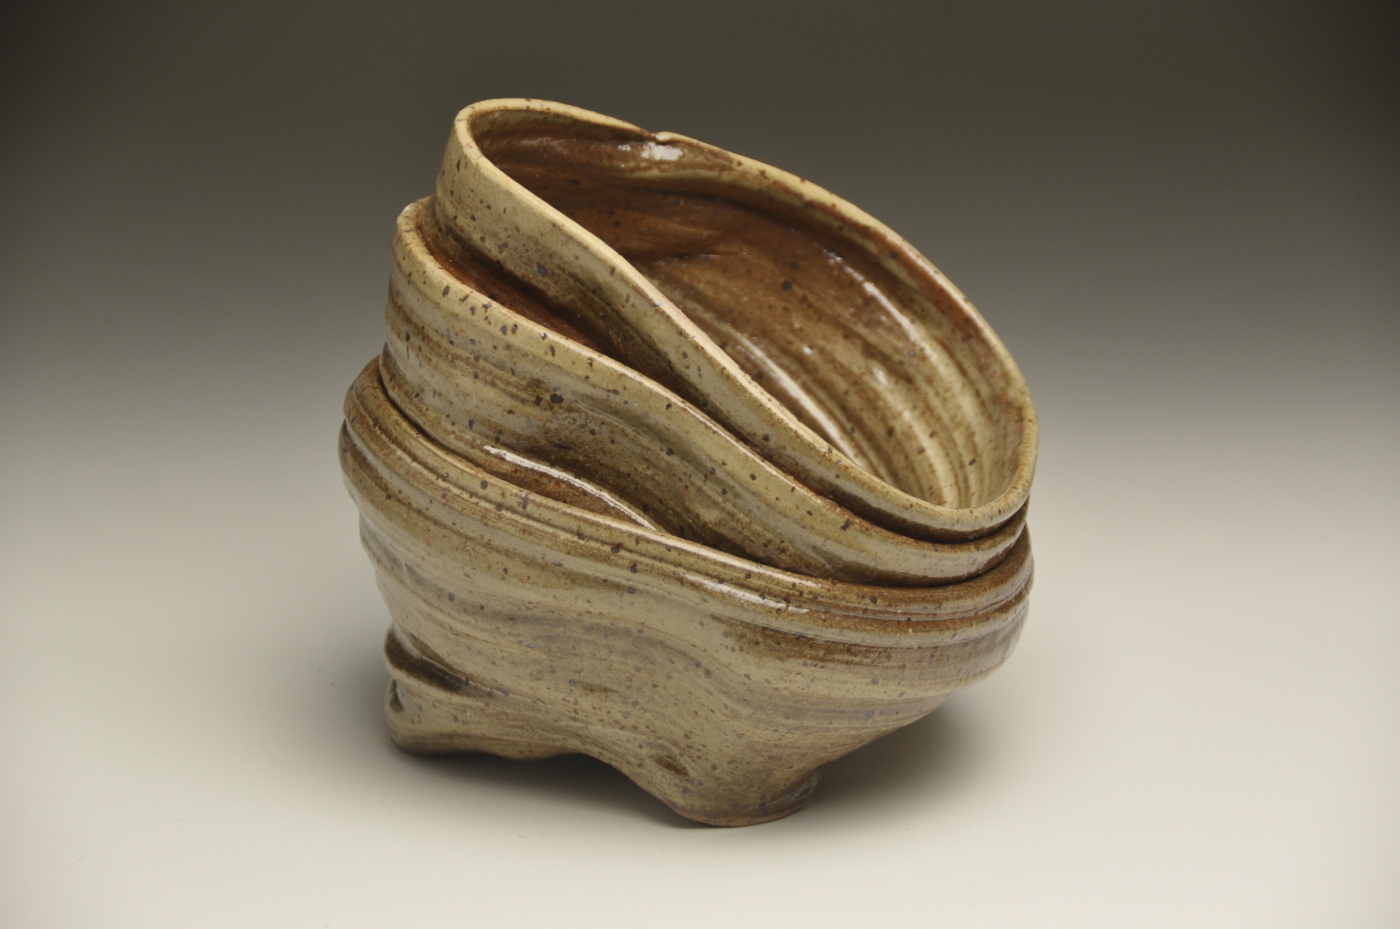 This ceramic piece is part of the Ottley's 2013 Burnt ring series.